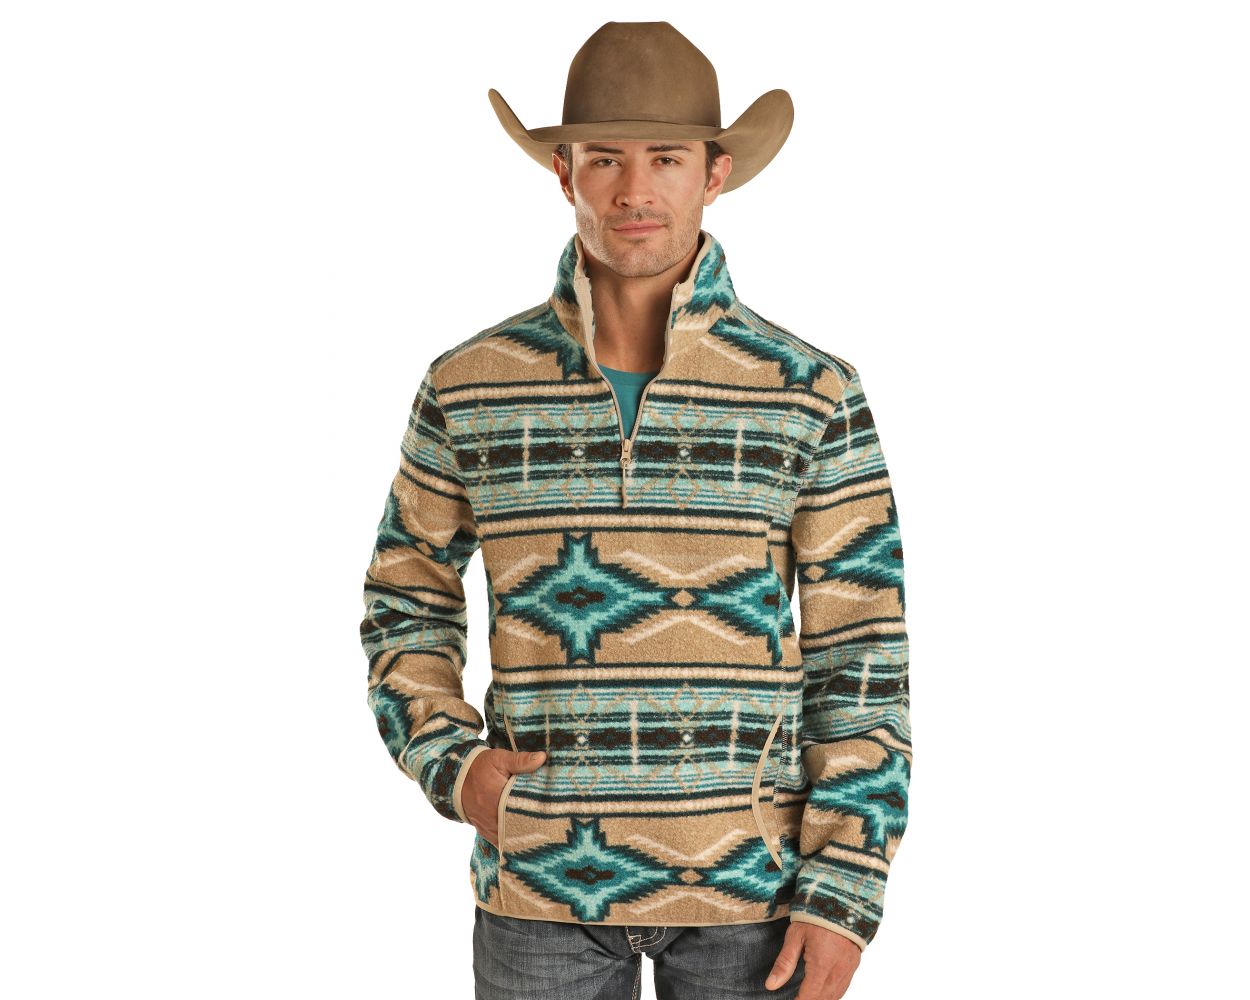 https://jimmyswesternwear.com/media/catalog/product/rdi/rdi/mens-rock-roll-turquoise-aztec-pullover-bm91c01938_1.jpg?width=265&height=265&store=default&image-type=image